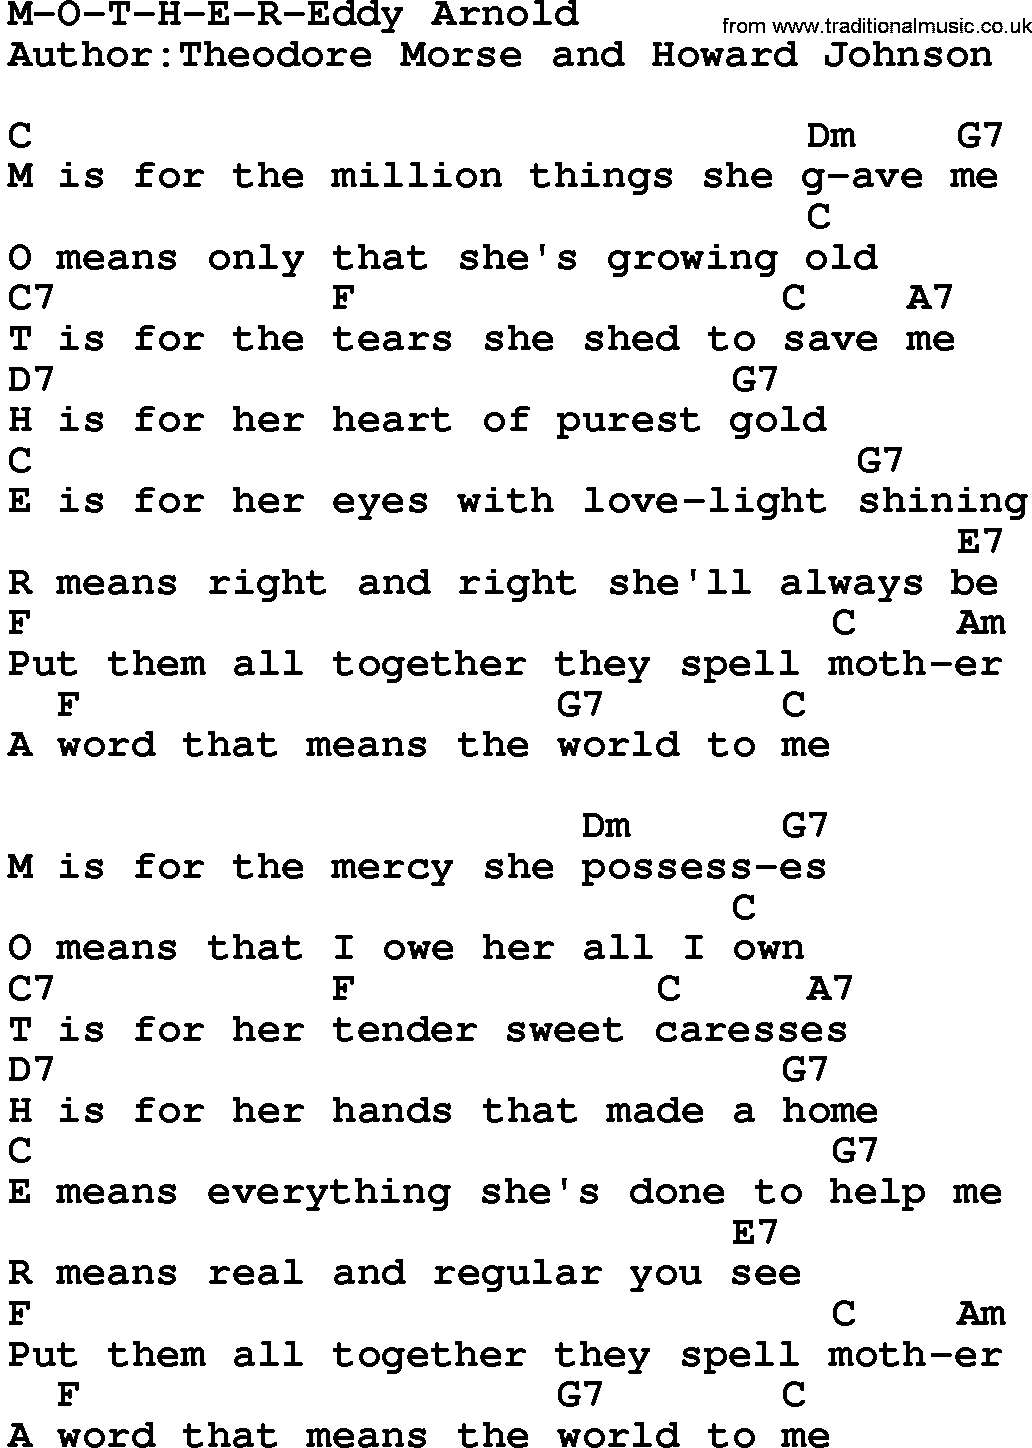 Country music song: M-O-T-H-E-R-Eddy Arnold lyrics and chords